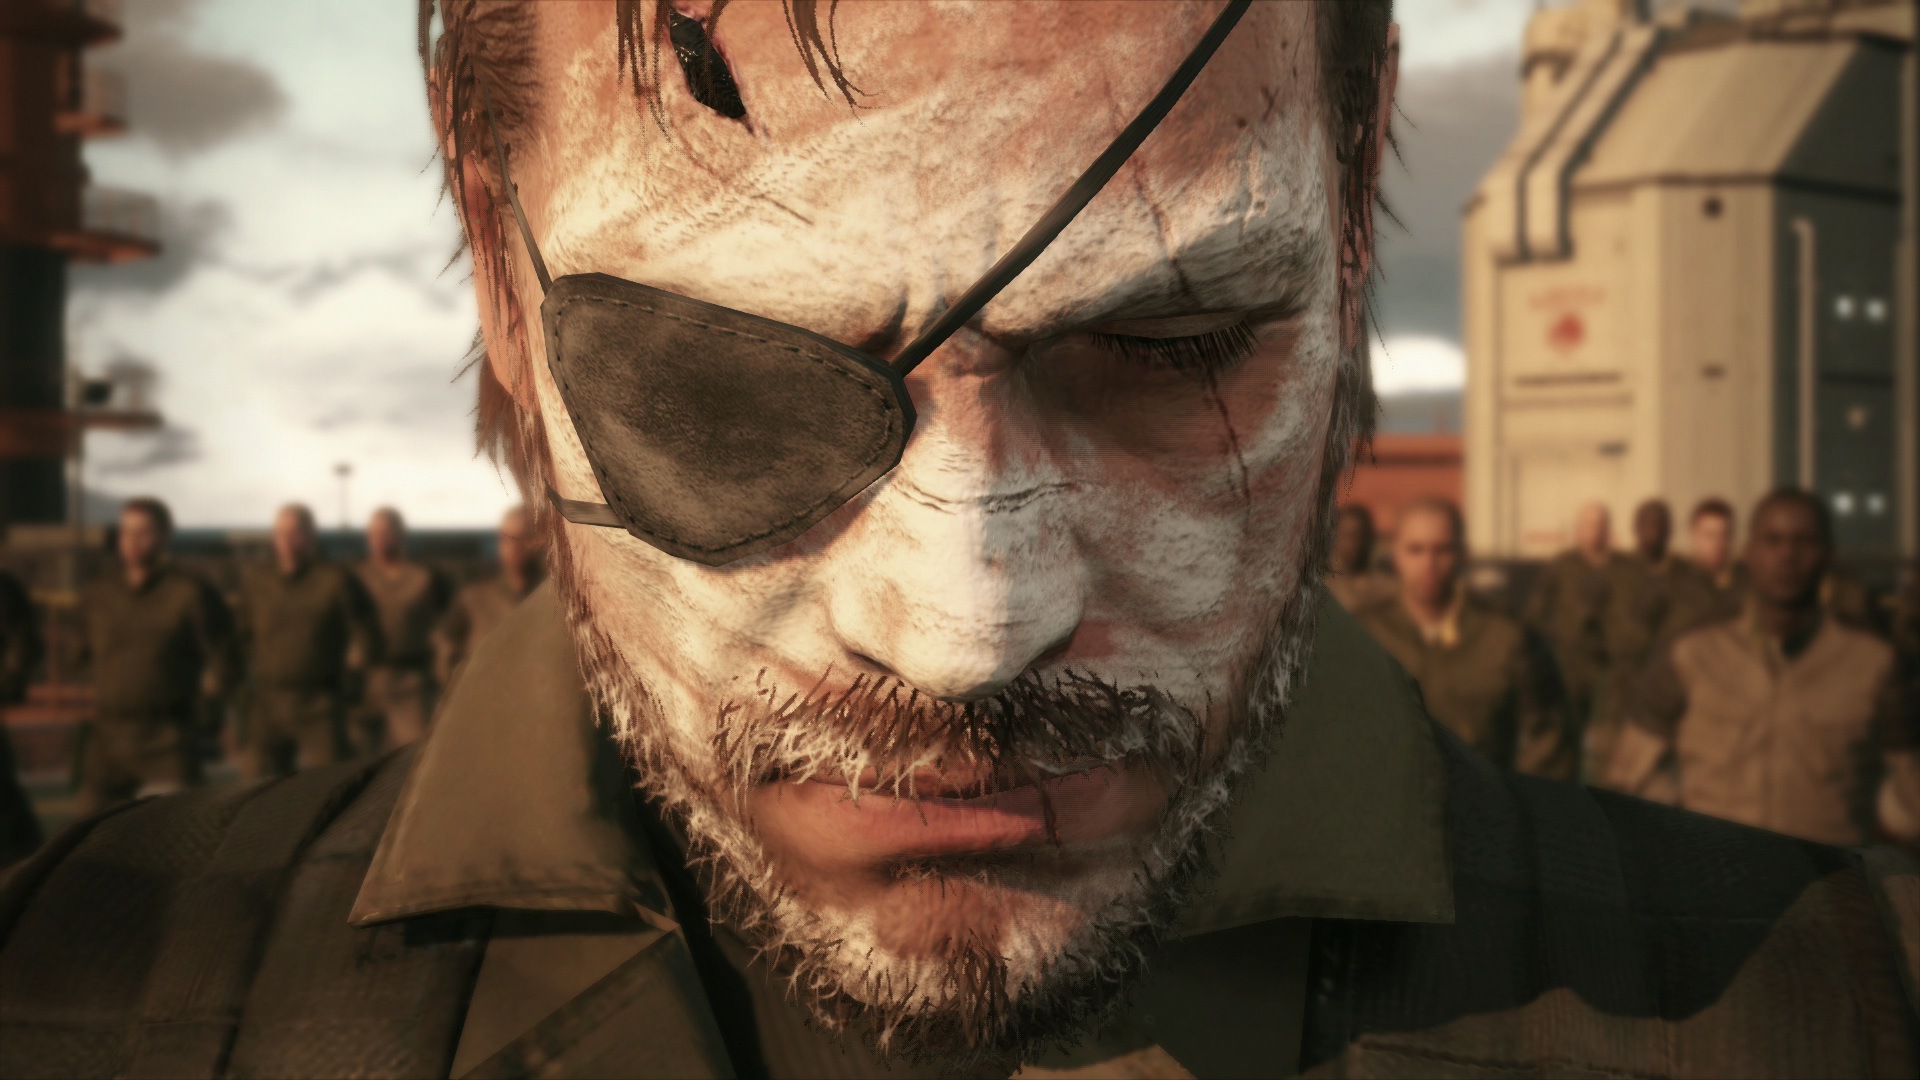 Save 40% on METAL GEAR SOLID V: THE PHANTOM PAIN on Steam